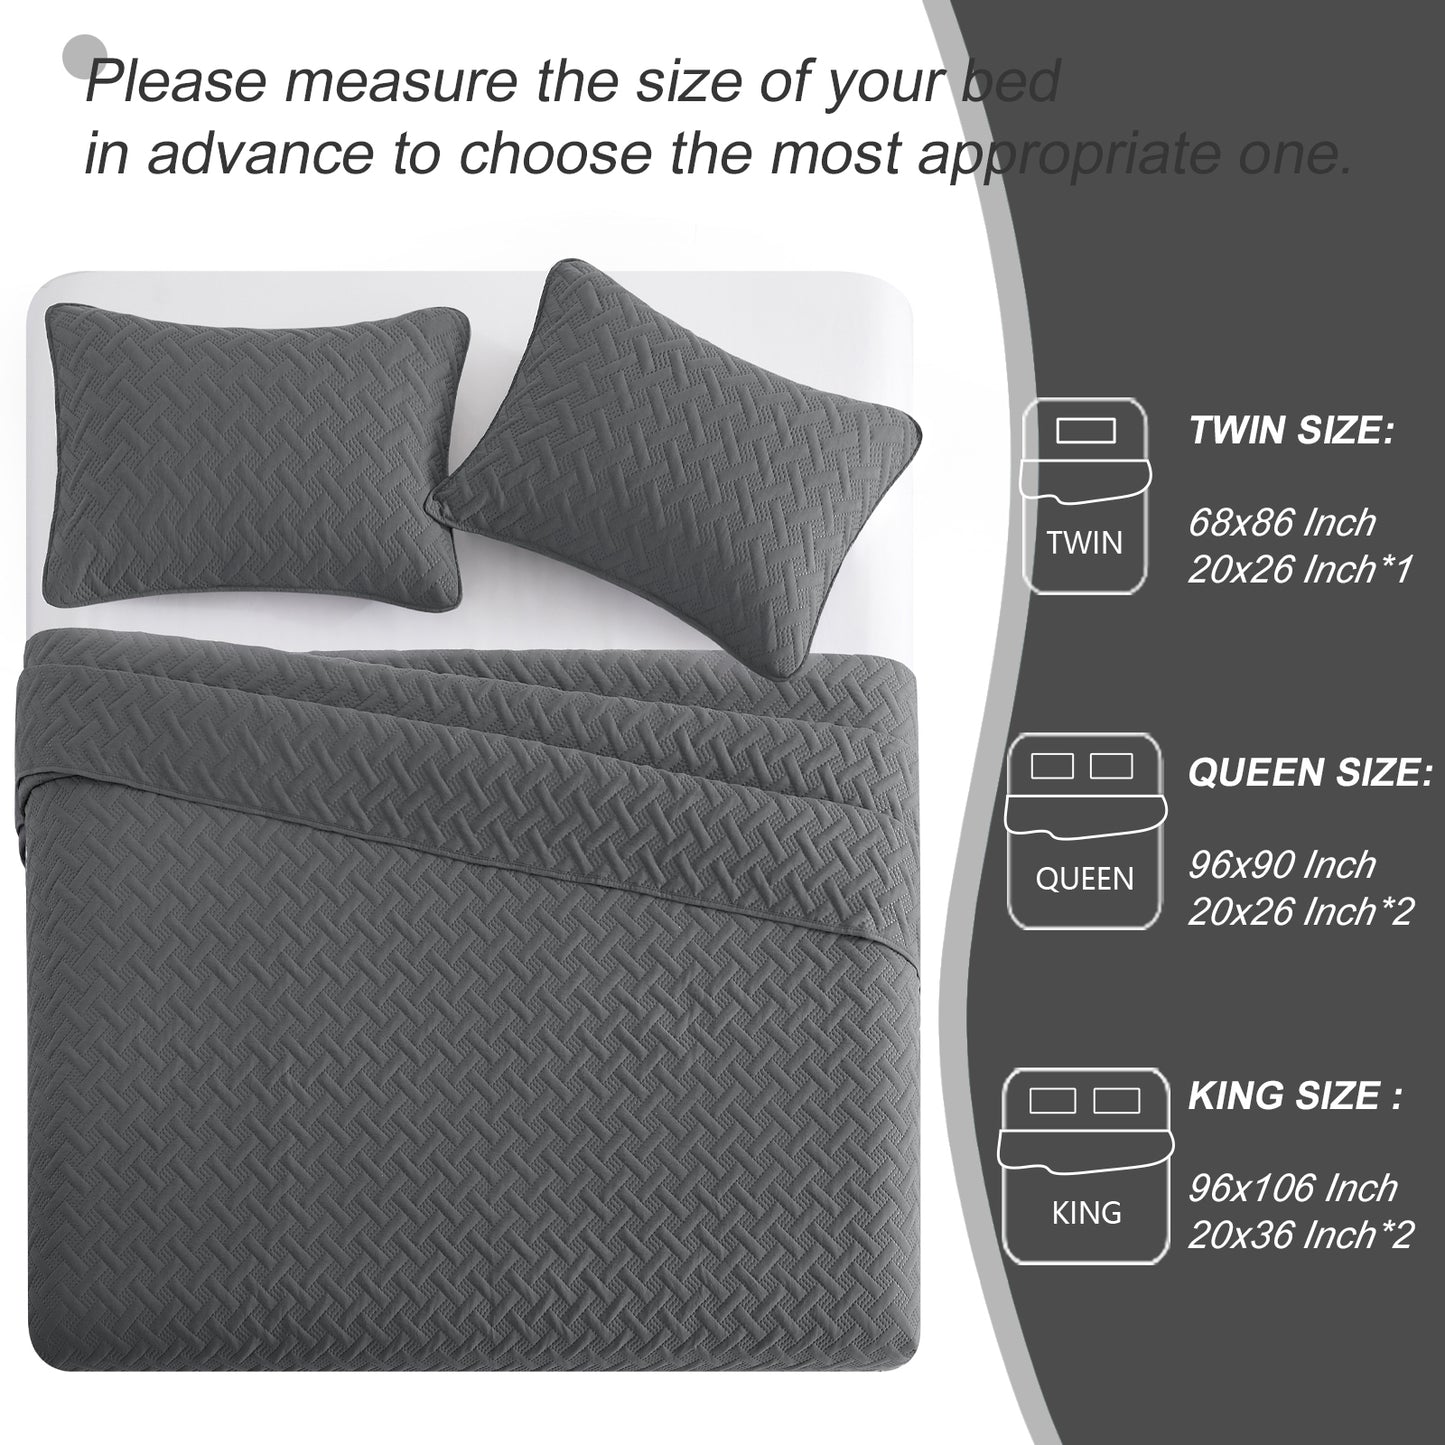 Exclusivo Mezcla 2-Piece Gray Twin Size Quilt Set, Weave Pattern Ultrasonic Lightweight and Soft Quilts/Bedspreads/Coverlets/Bedding Set (1 Quilt, 1 Pillow Sham) for All Seasons